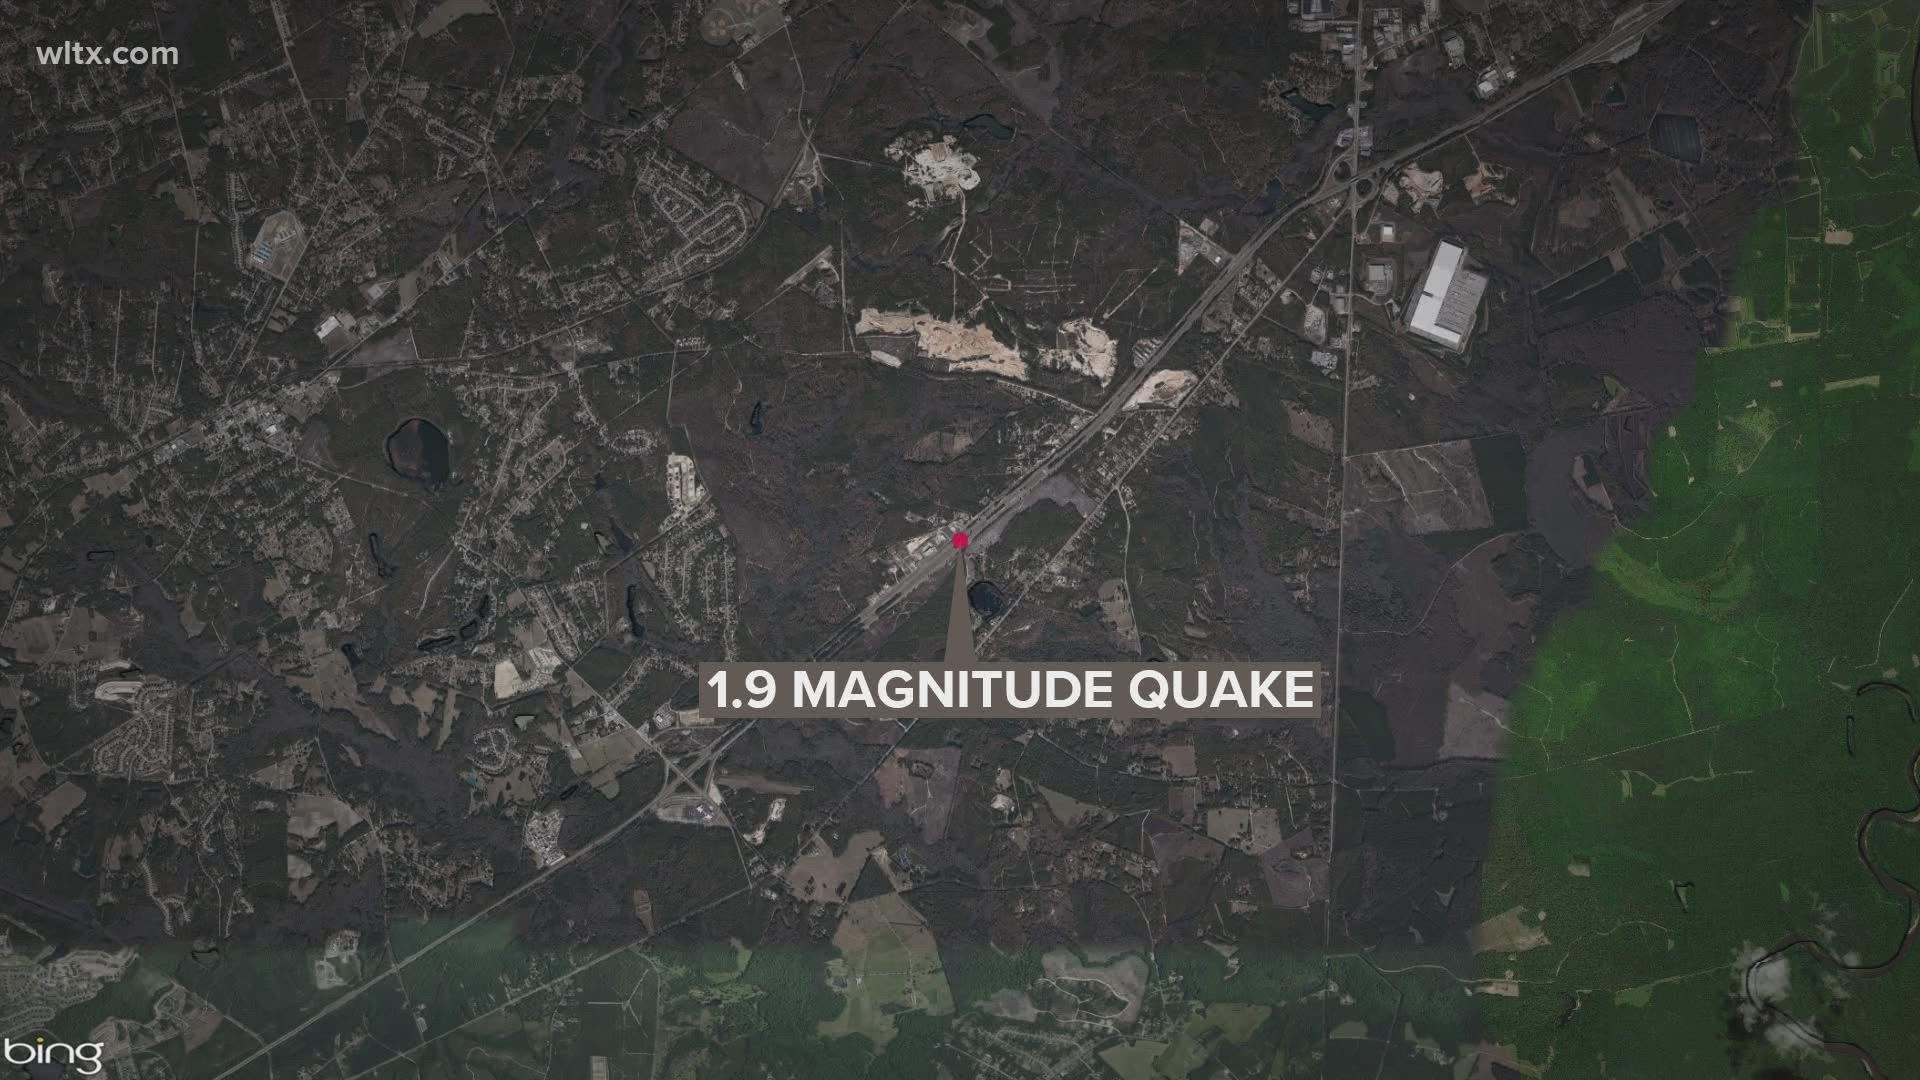 Experts state the quakes are part of a swarm that appears to be the longest in the state's history.